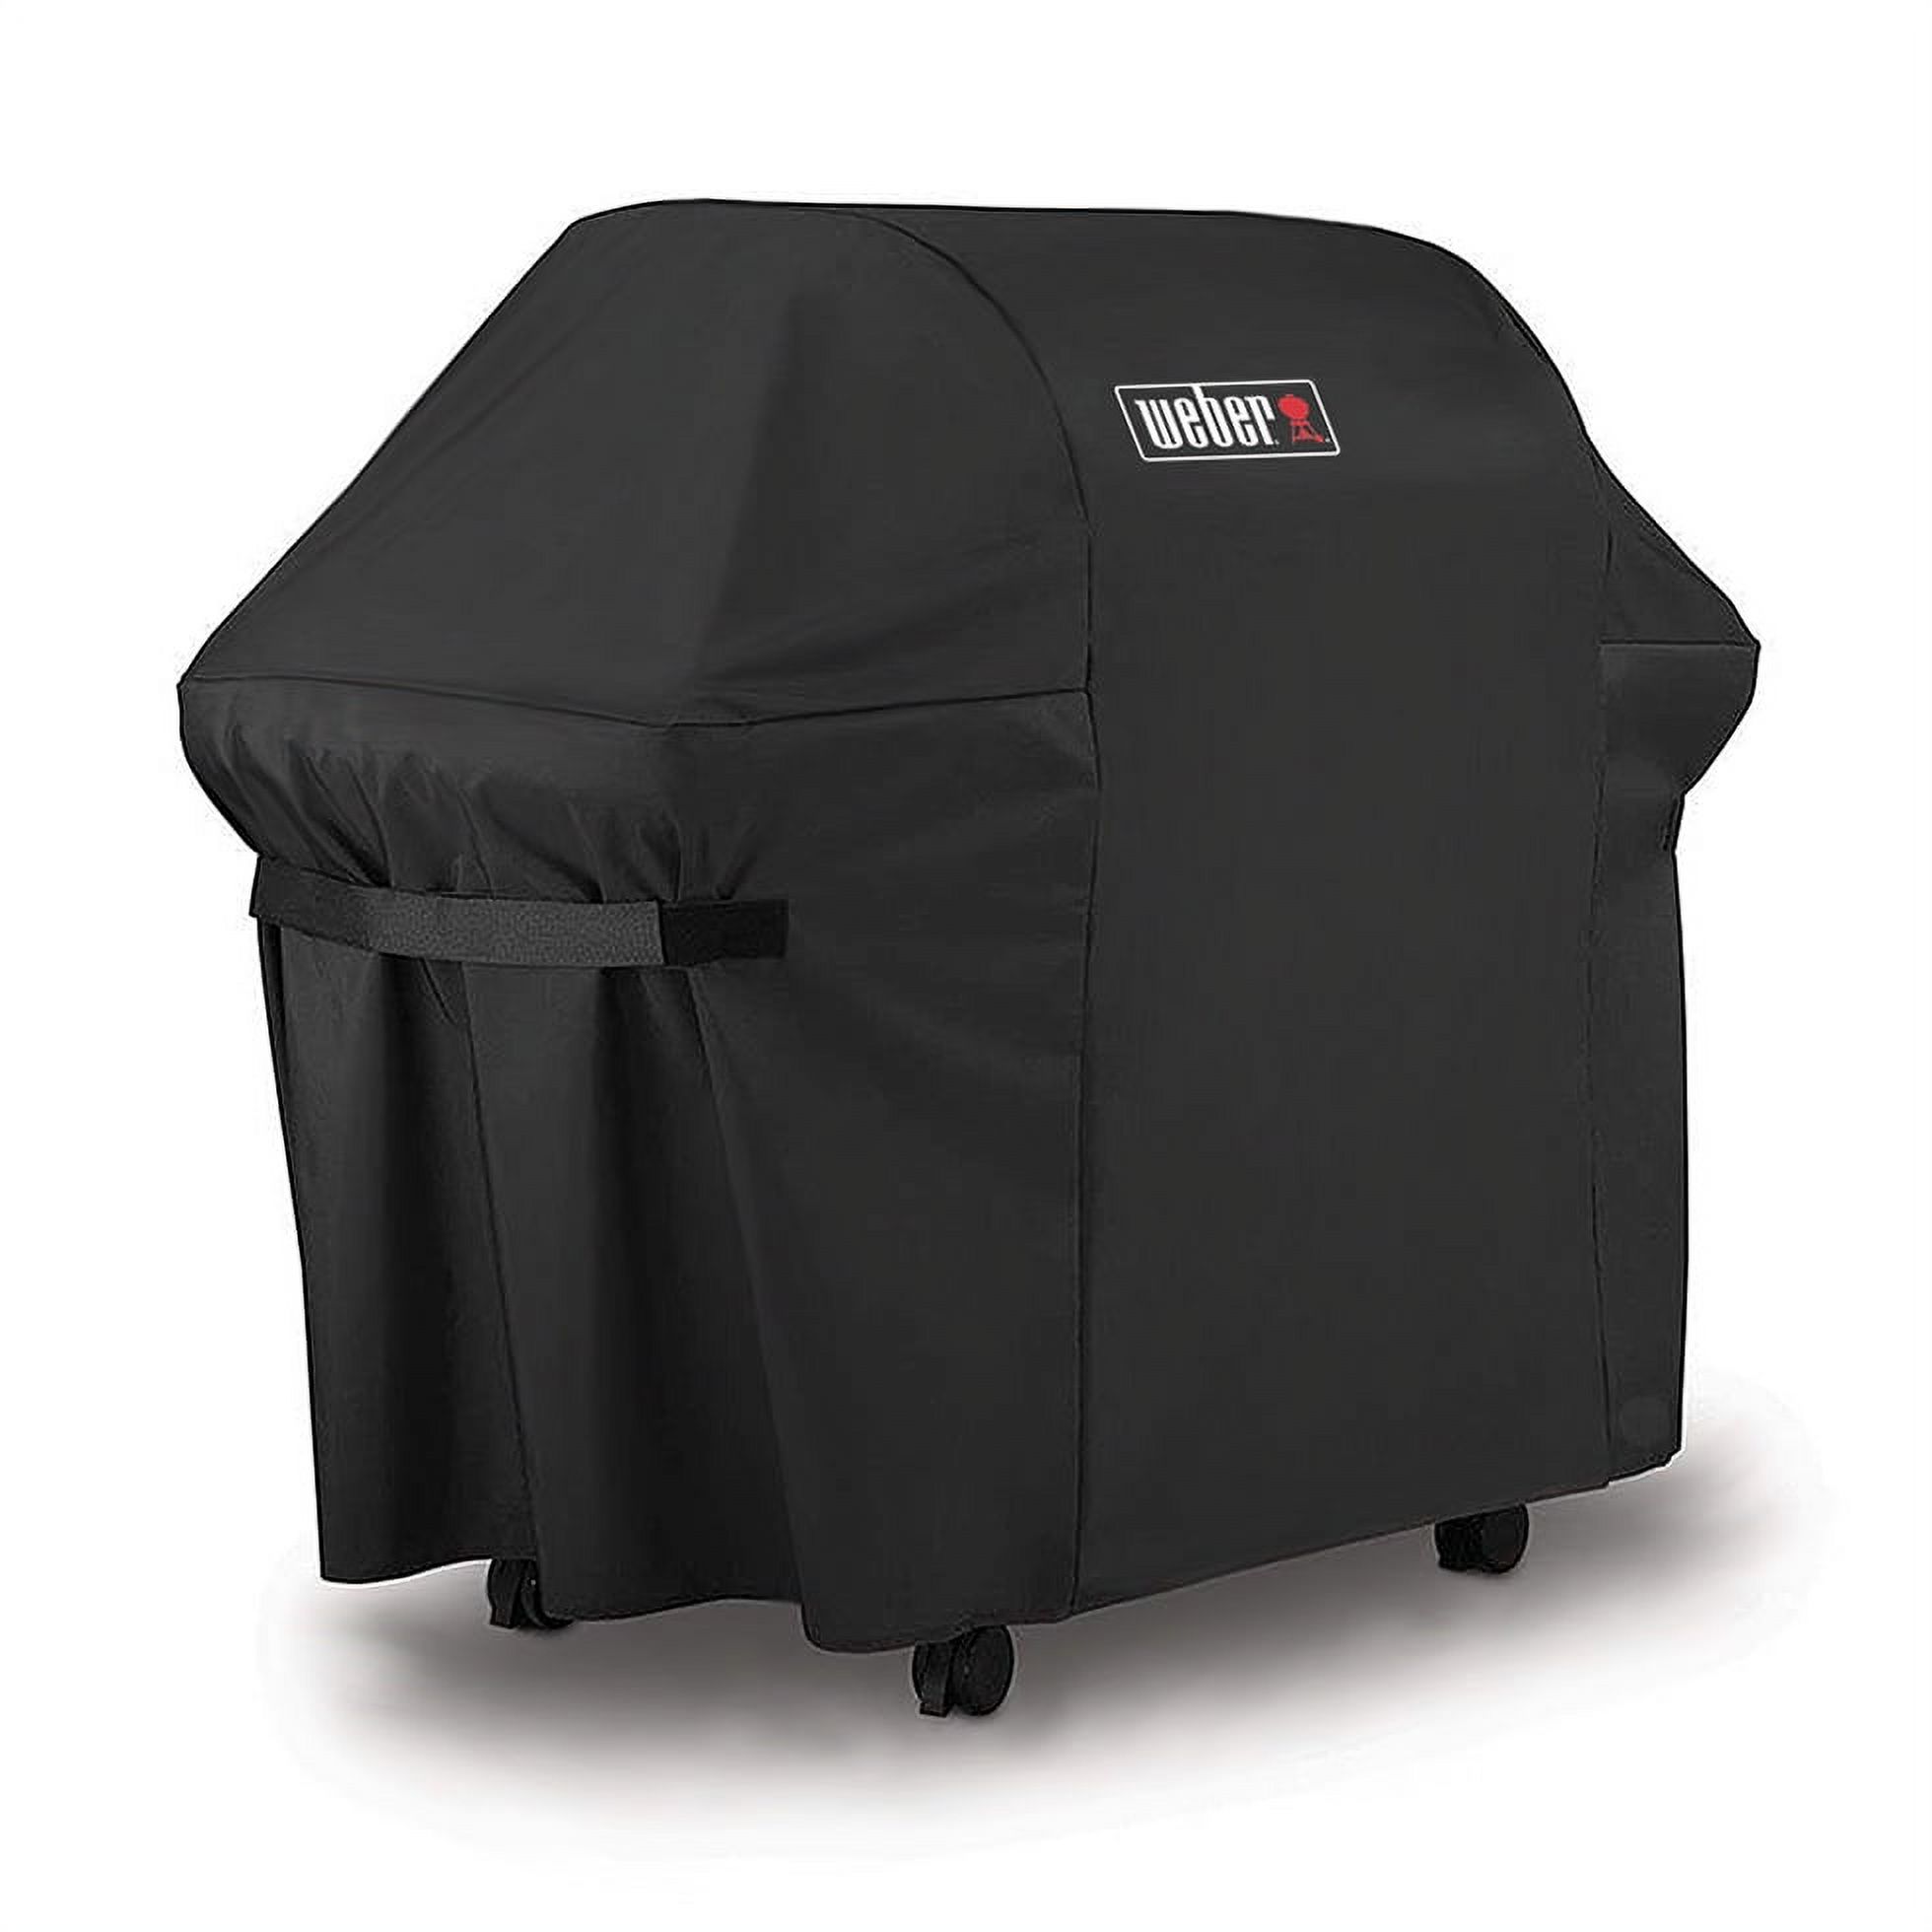 Weber 7107 Grill Cover for Weber Genesis 300 Series and Genesis II Gas Grills (60 X 24 X 44 inches) - image 1 of 5